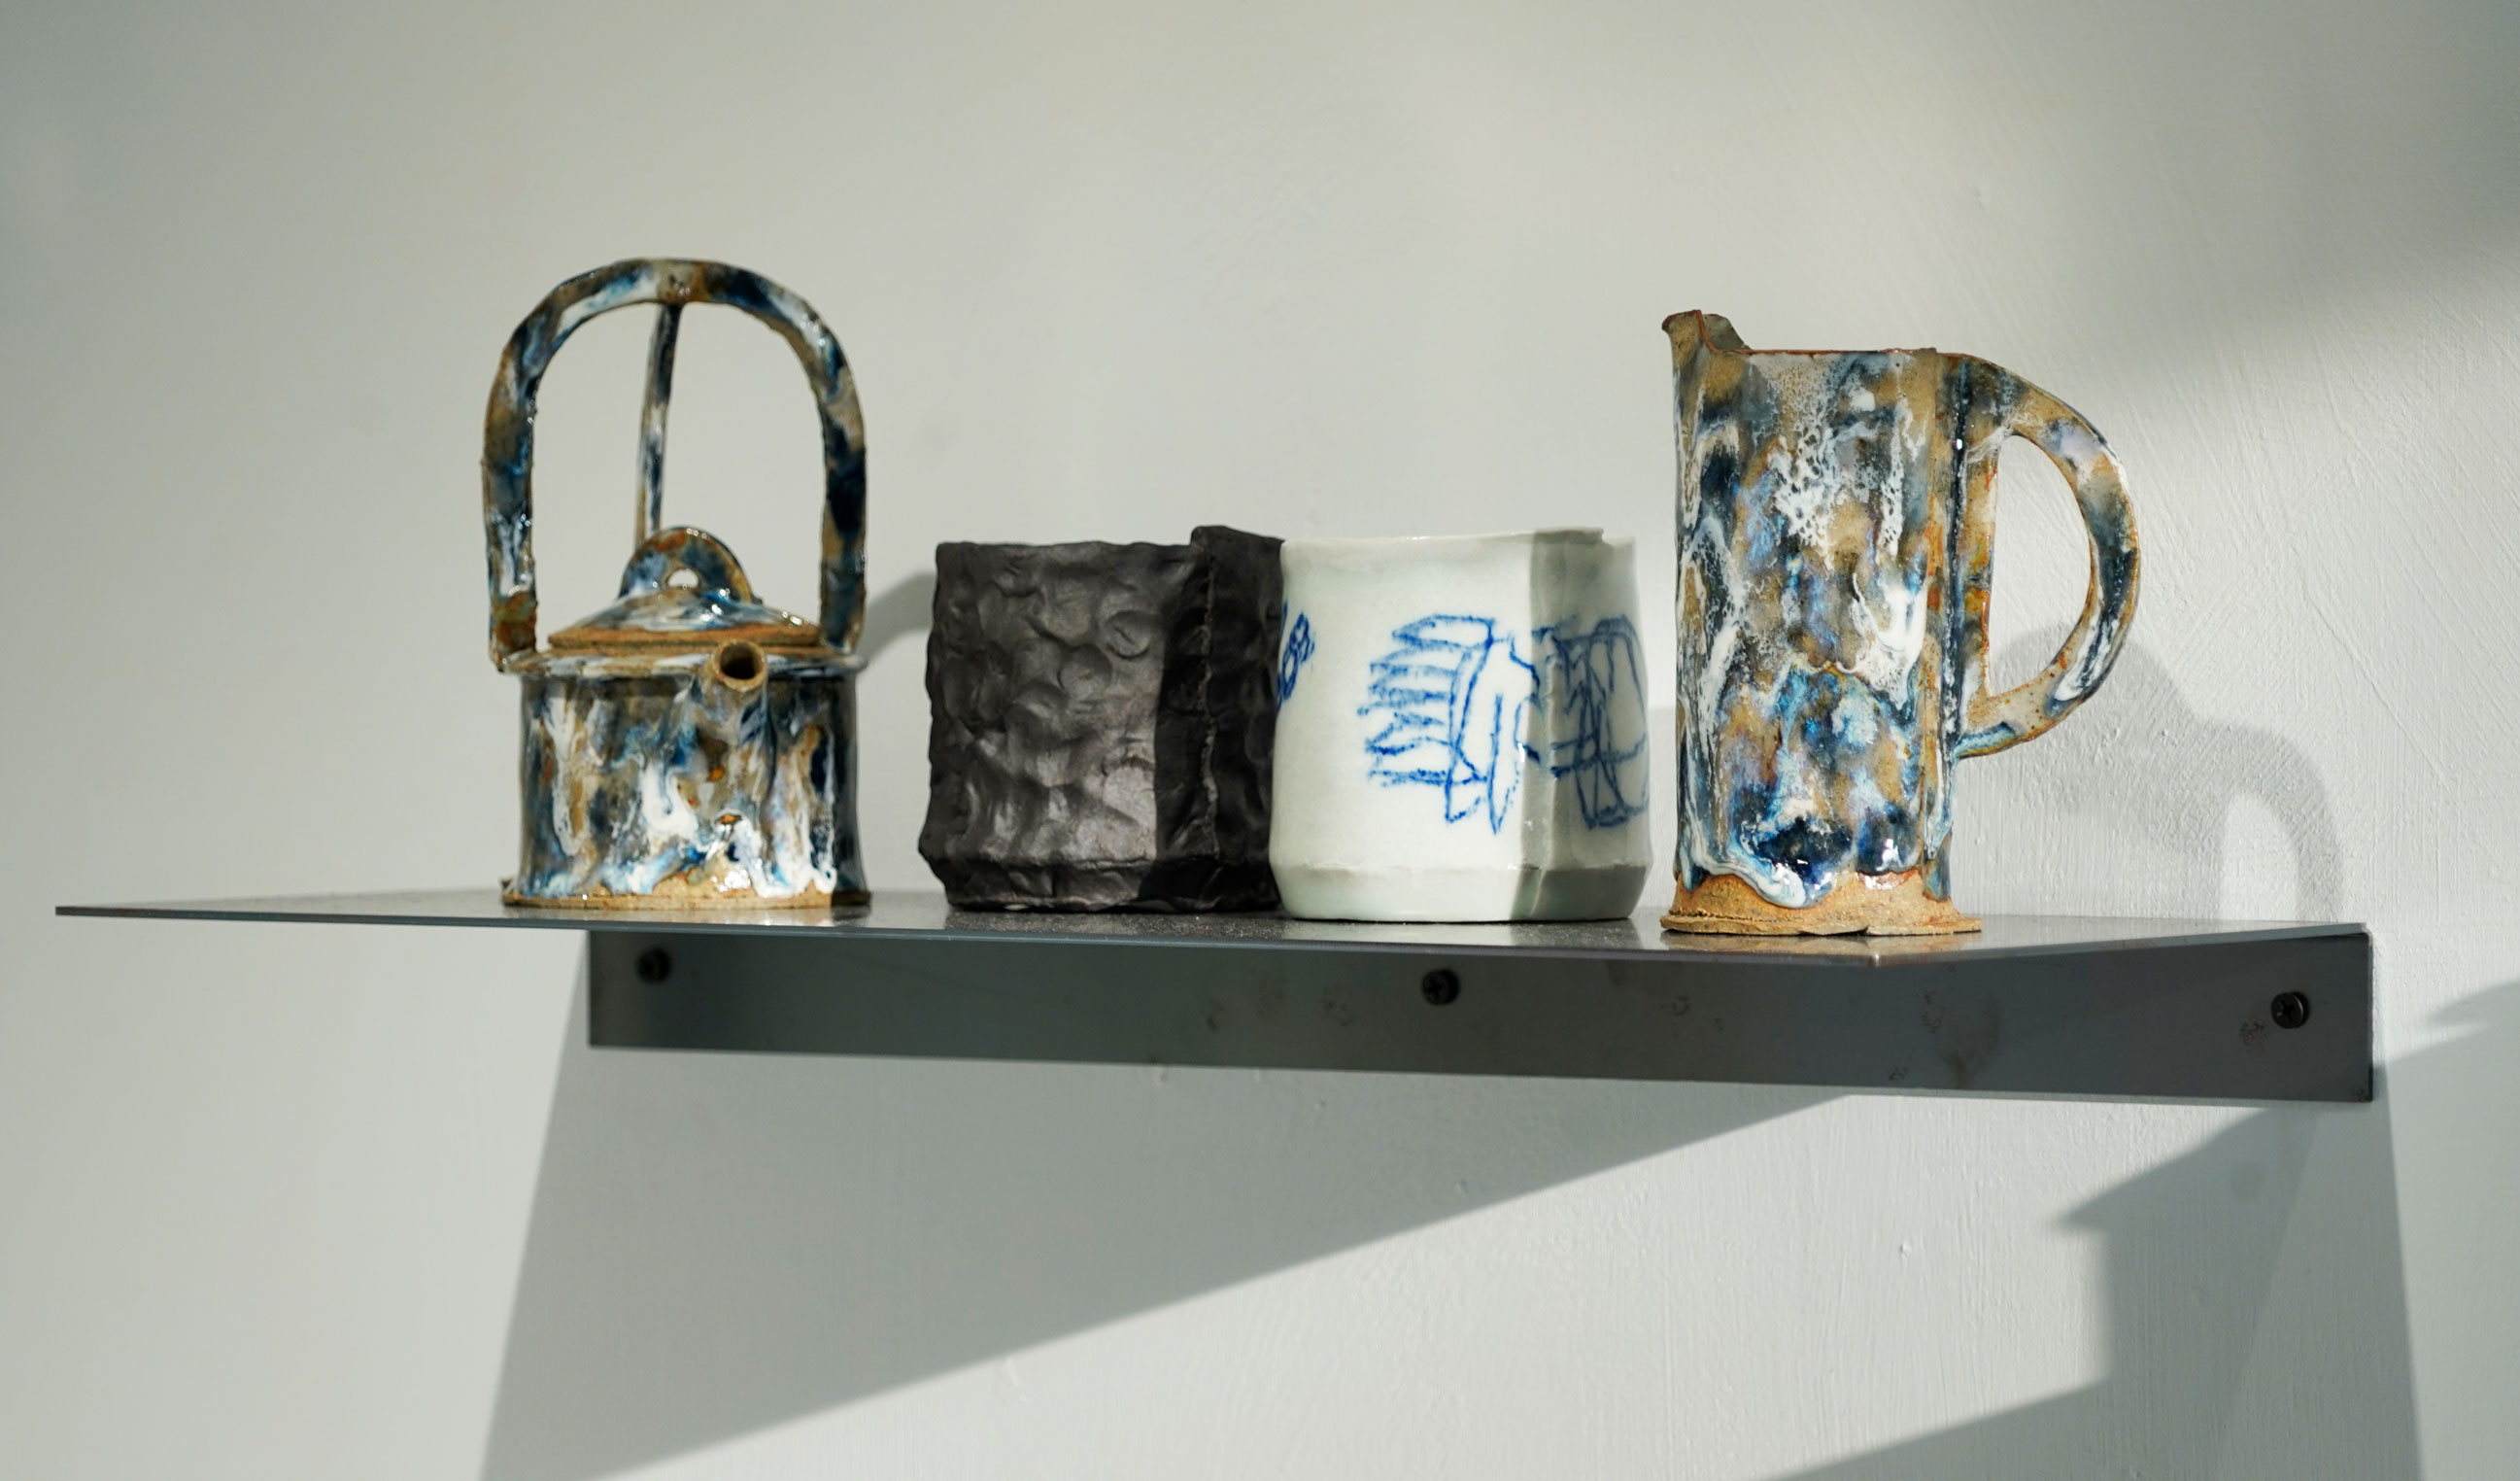 A collection of ceramic teaware featured in Brian Molanphy's solo exhibition.